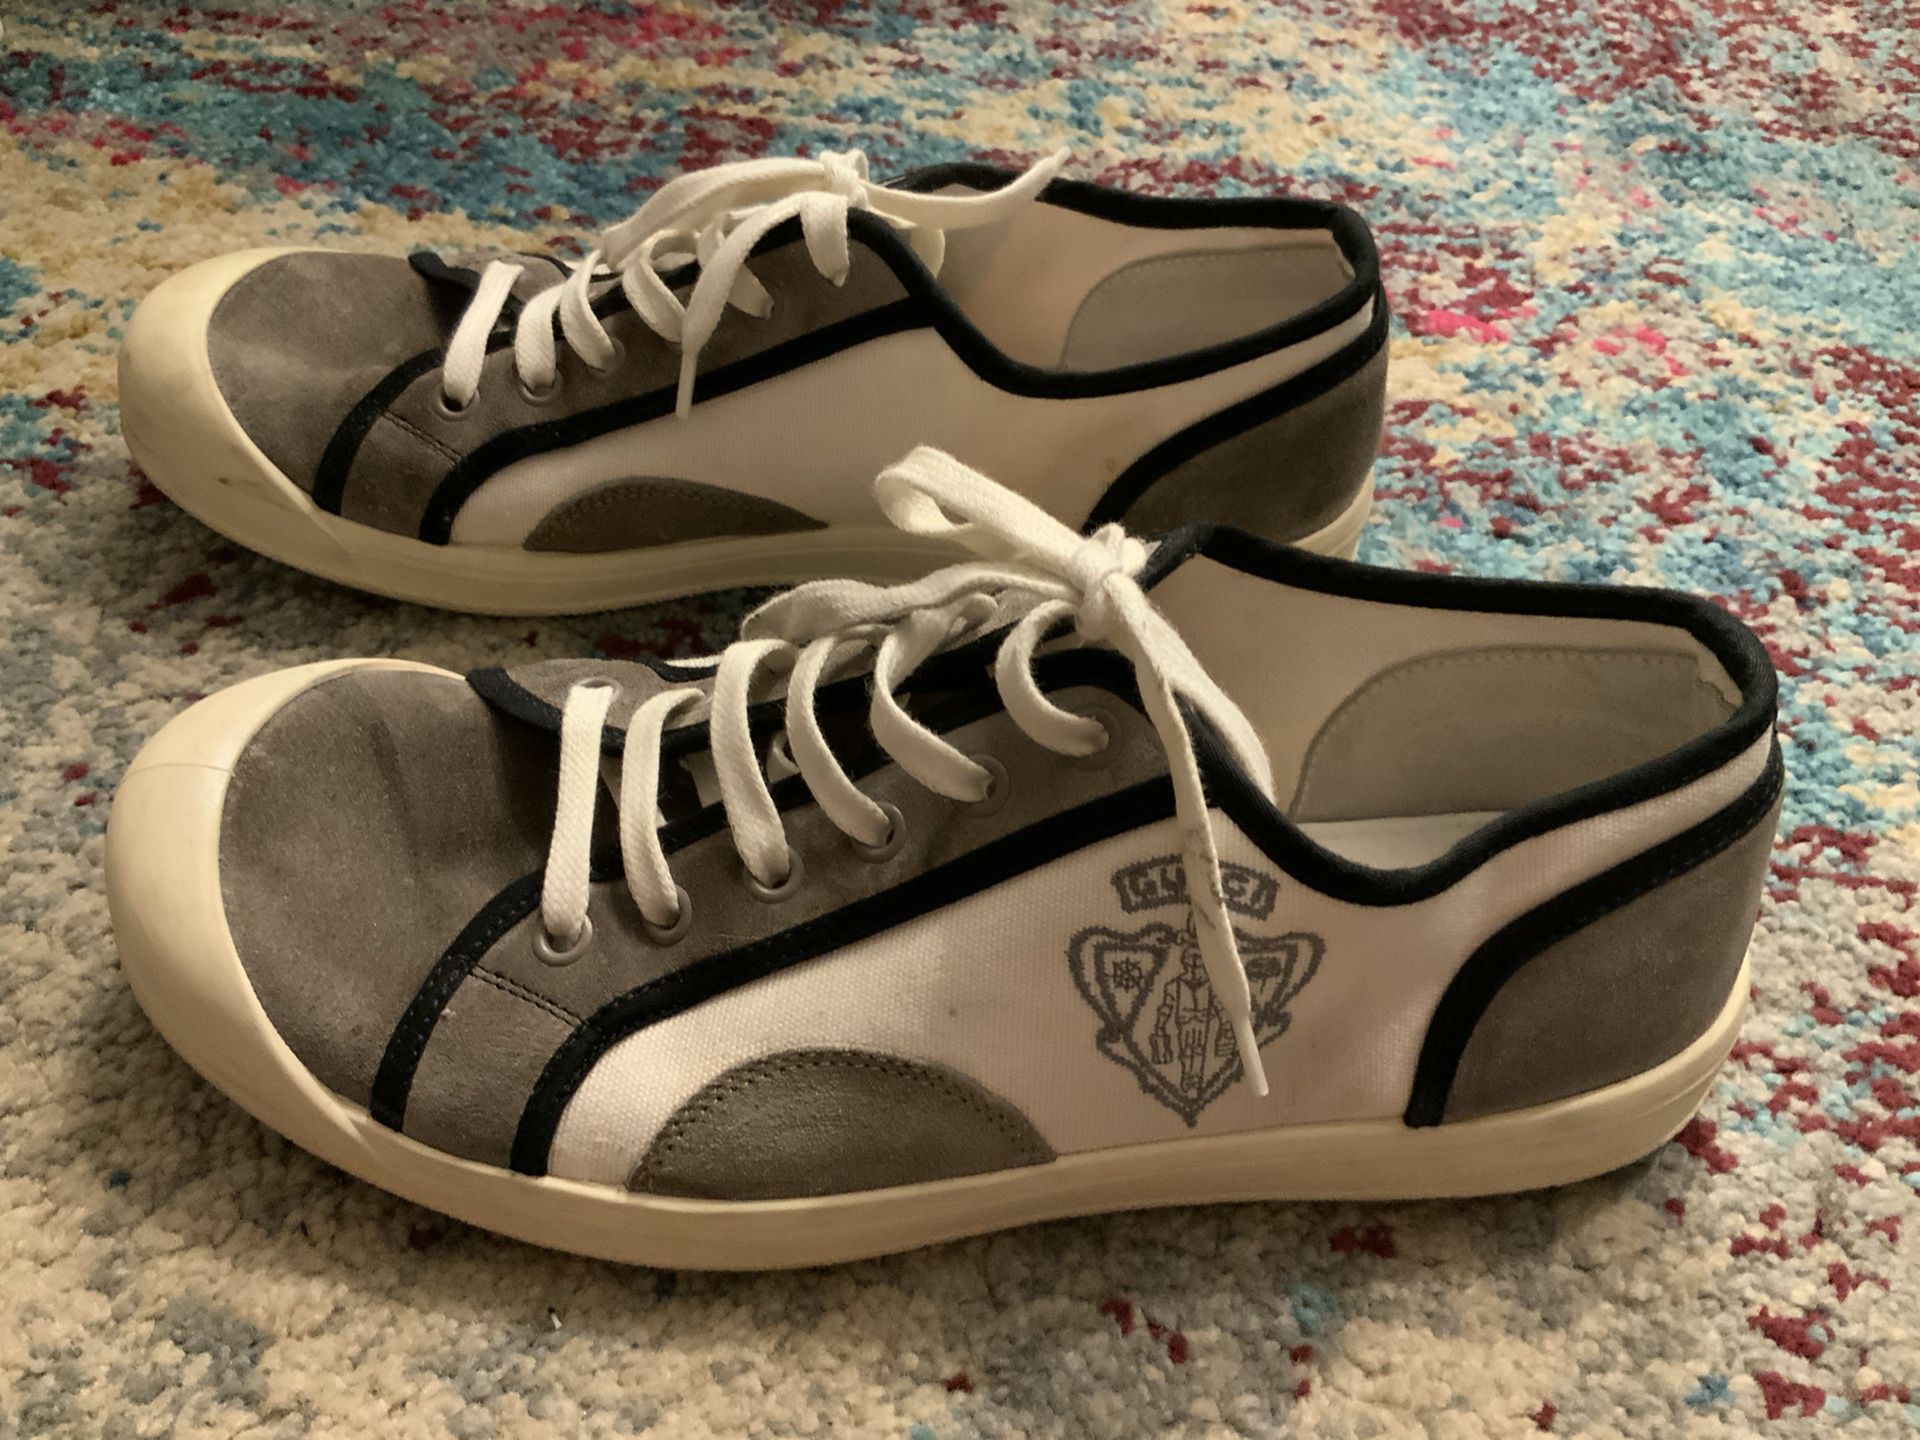 Pre-loved Gucci low-top sneakers in white and gray